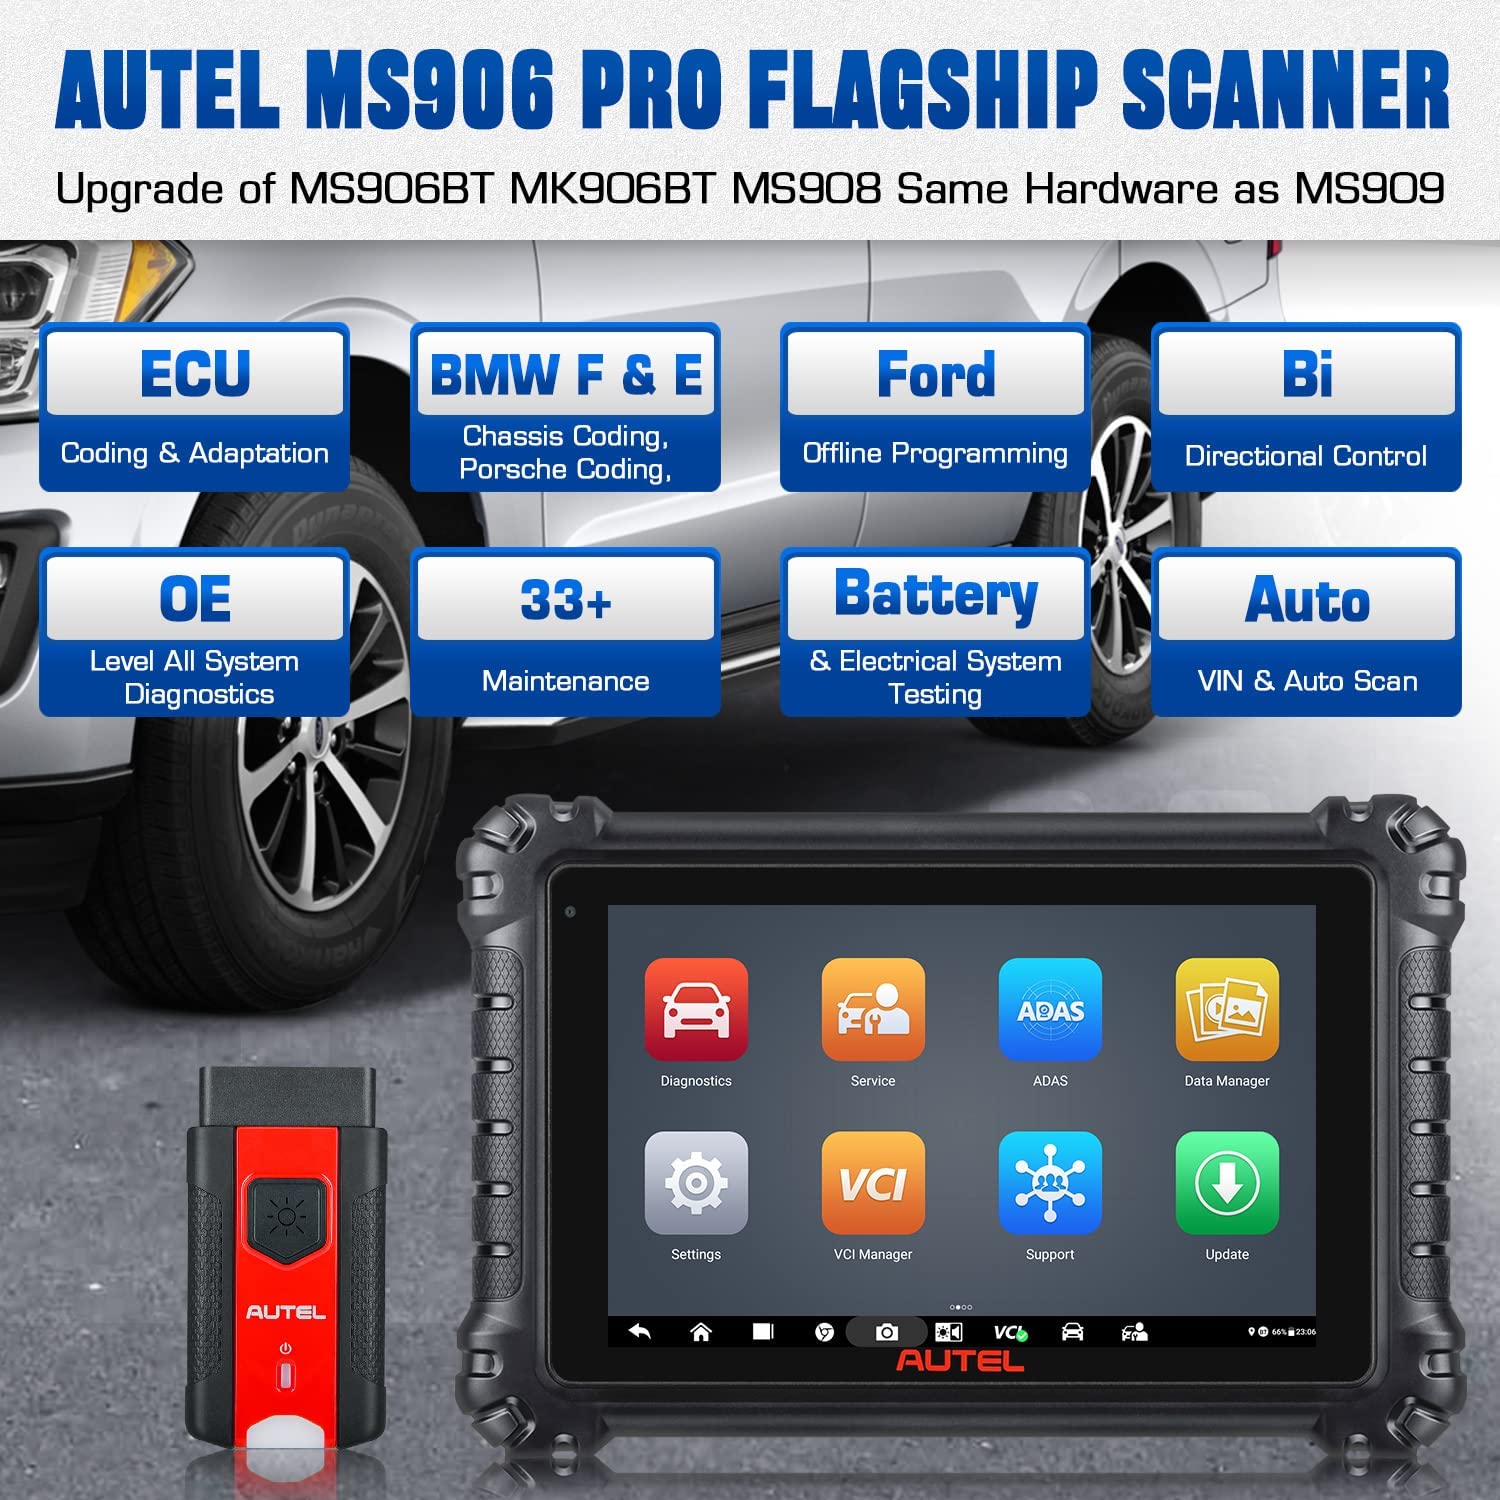 Autel MaxiSYS MS906 Pro-TS OBD2 Wi-Fi Diagnostic Scanner and TPMS Tool